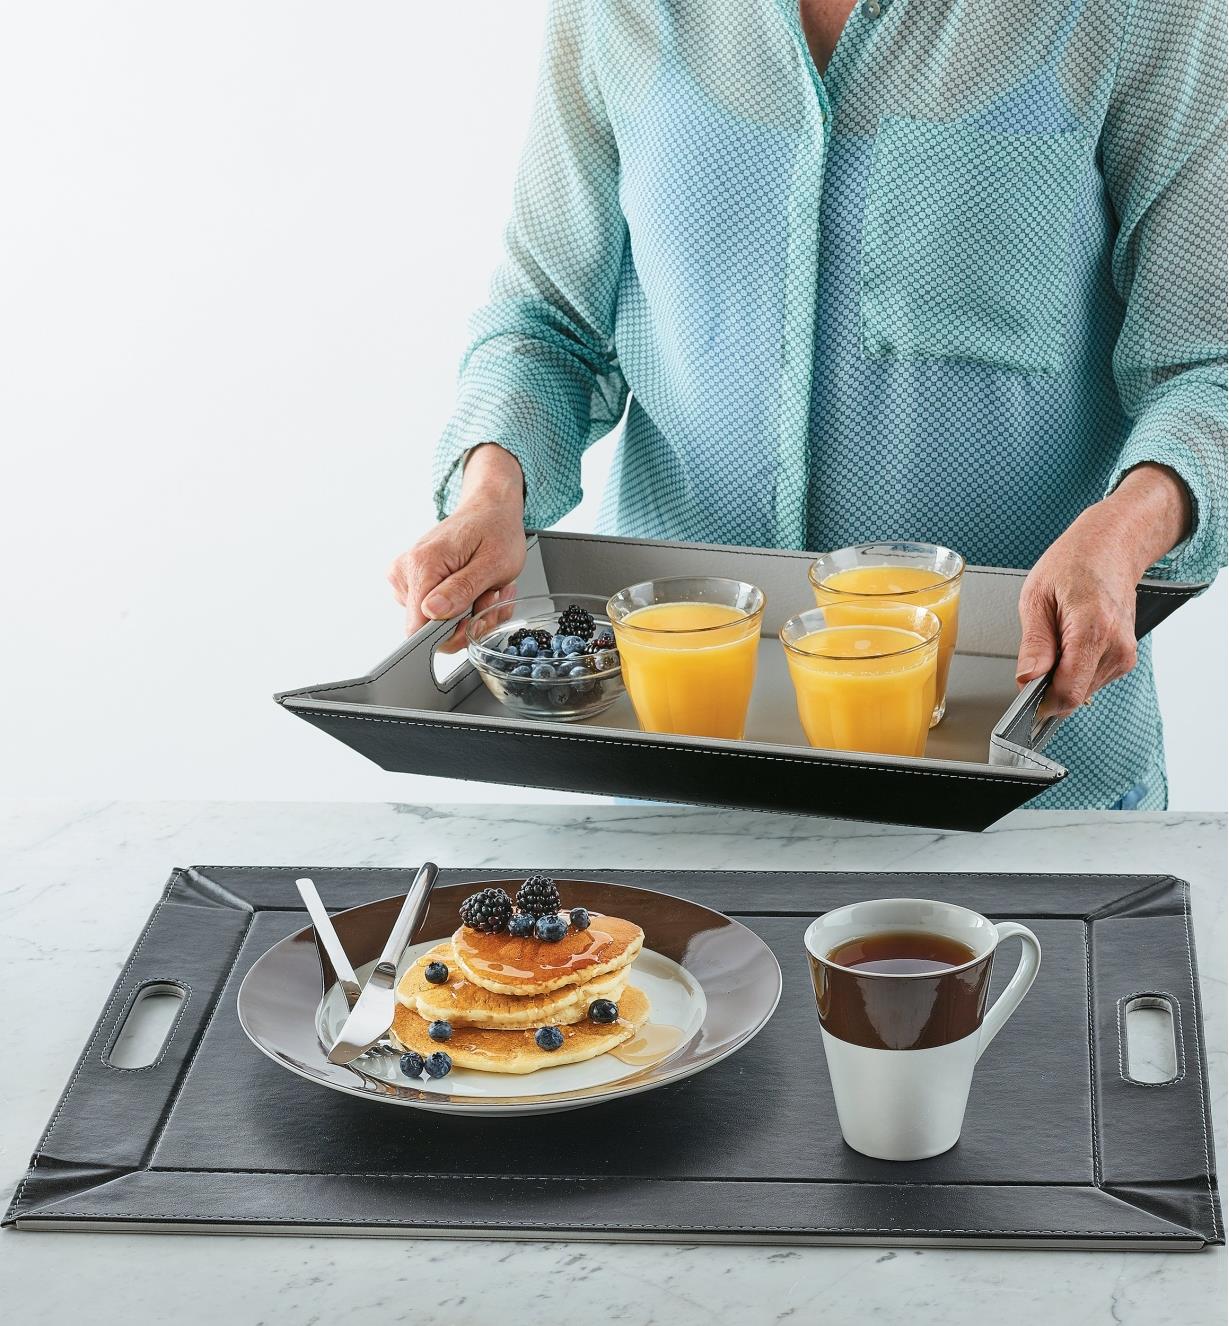 A woman carries juice and berries on a FreeForm Folding Tray behind a flattened tray holding pancakes and tea